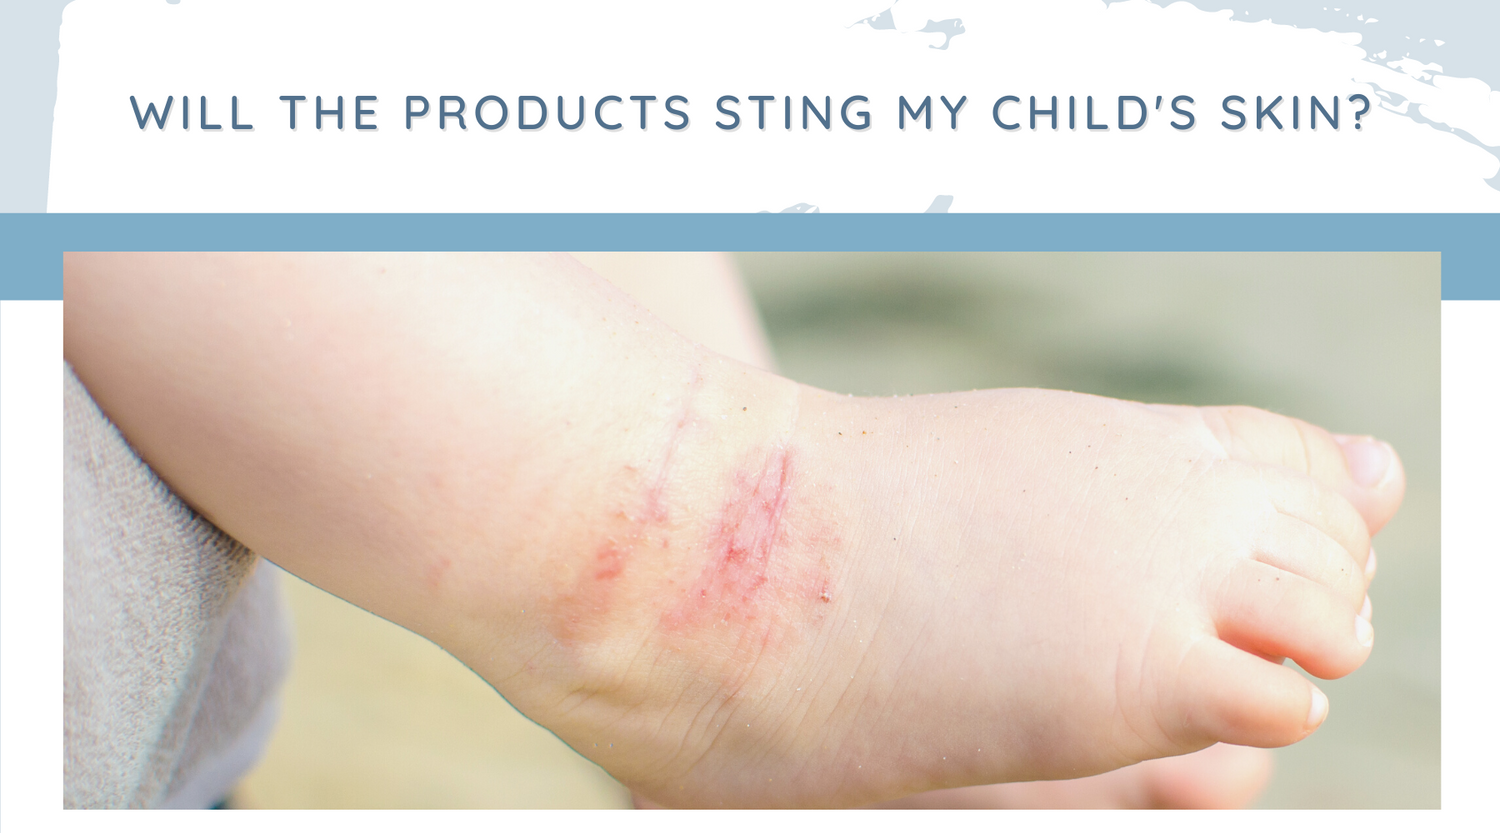 Will the products sting my child's skin?